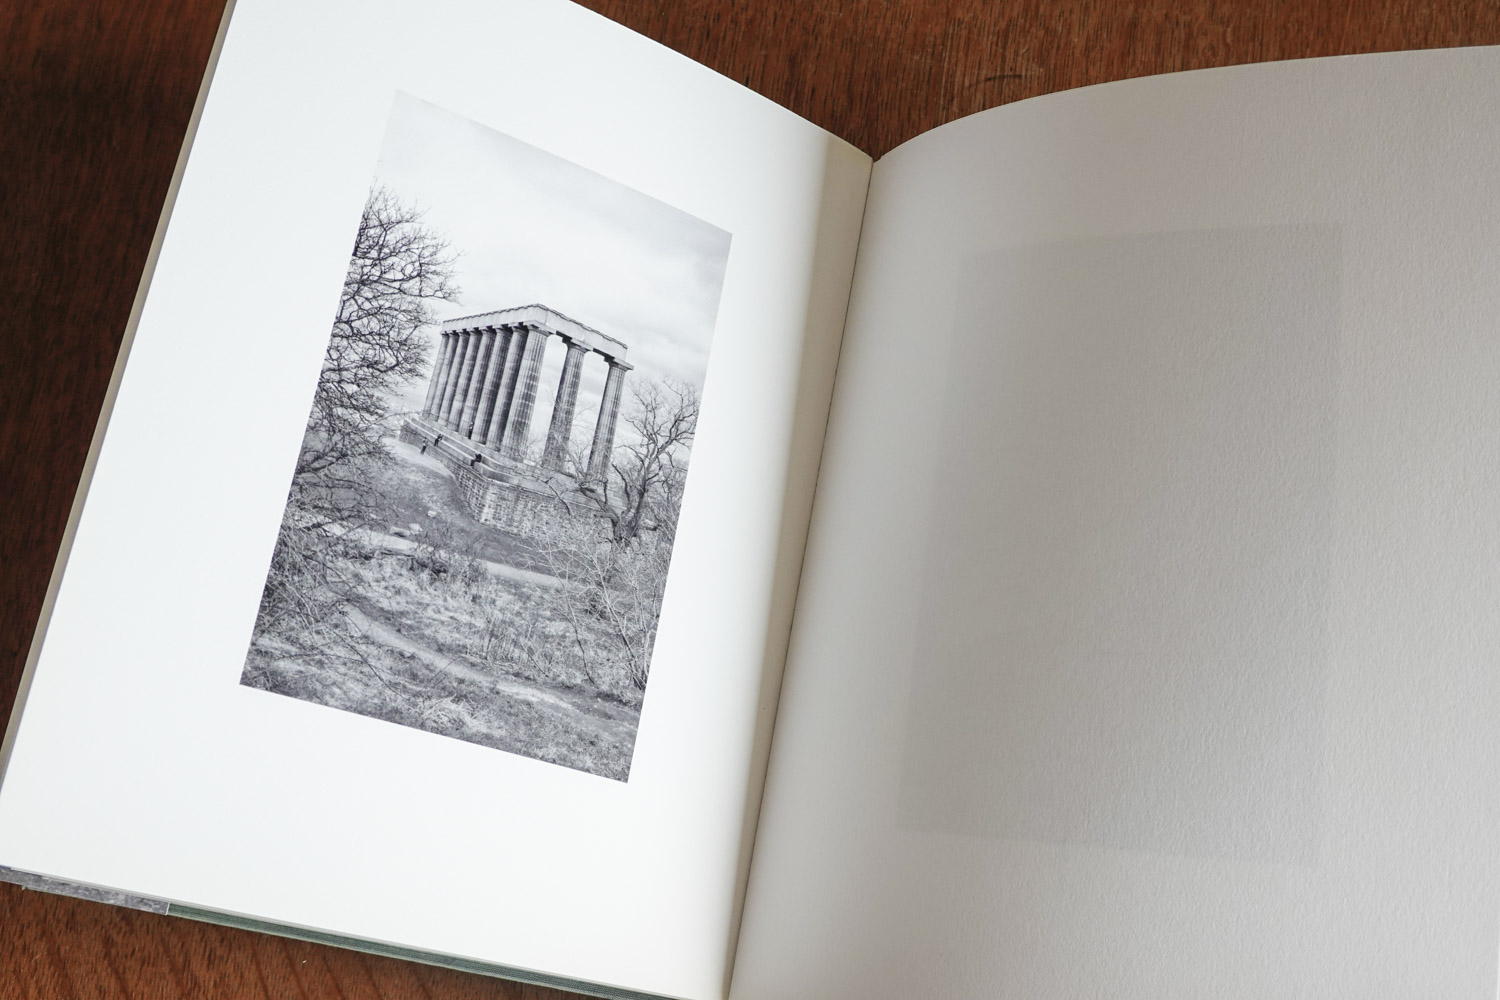 Photo of the book Oneiric open at a page showing a black and white photograph of a classical folly in a park.